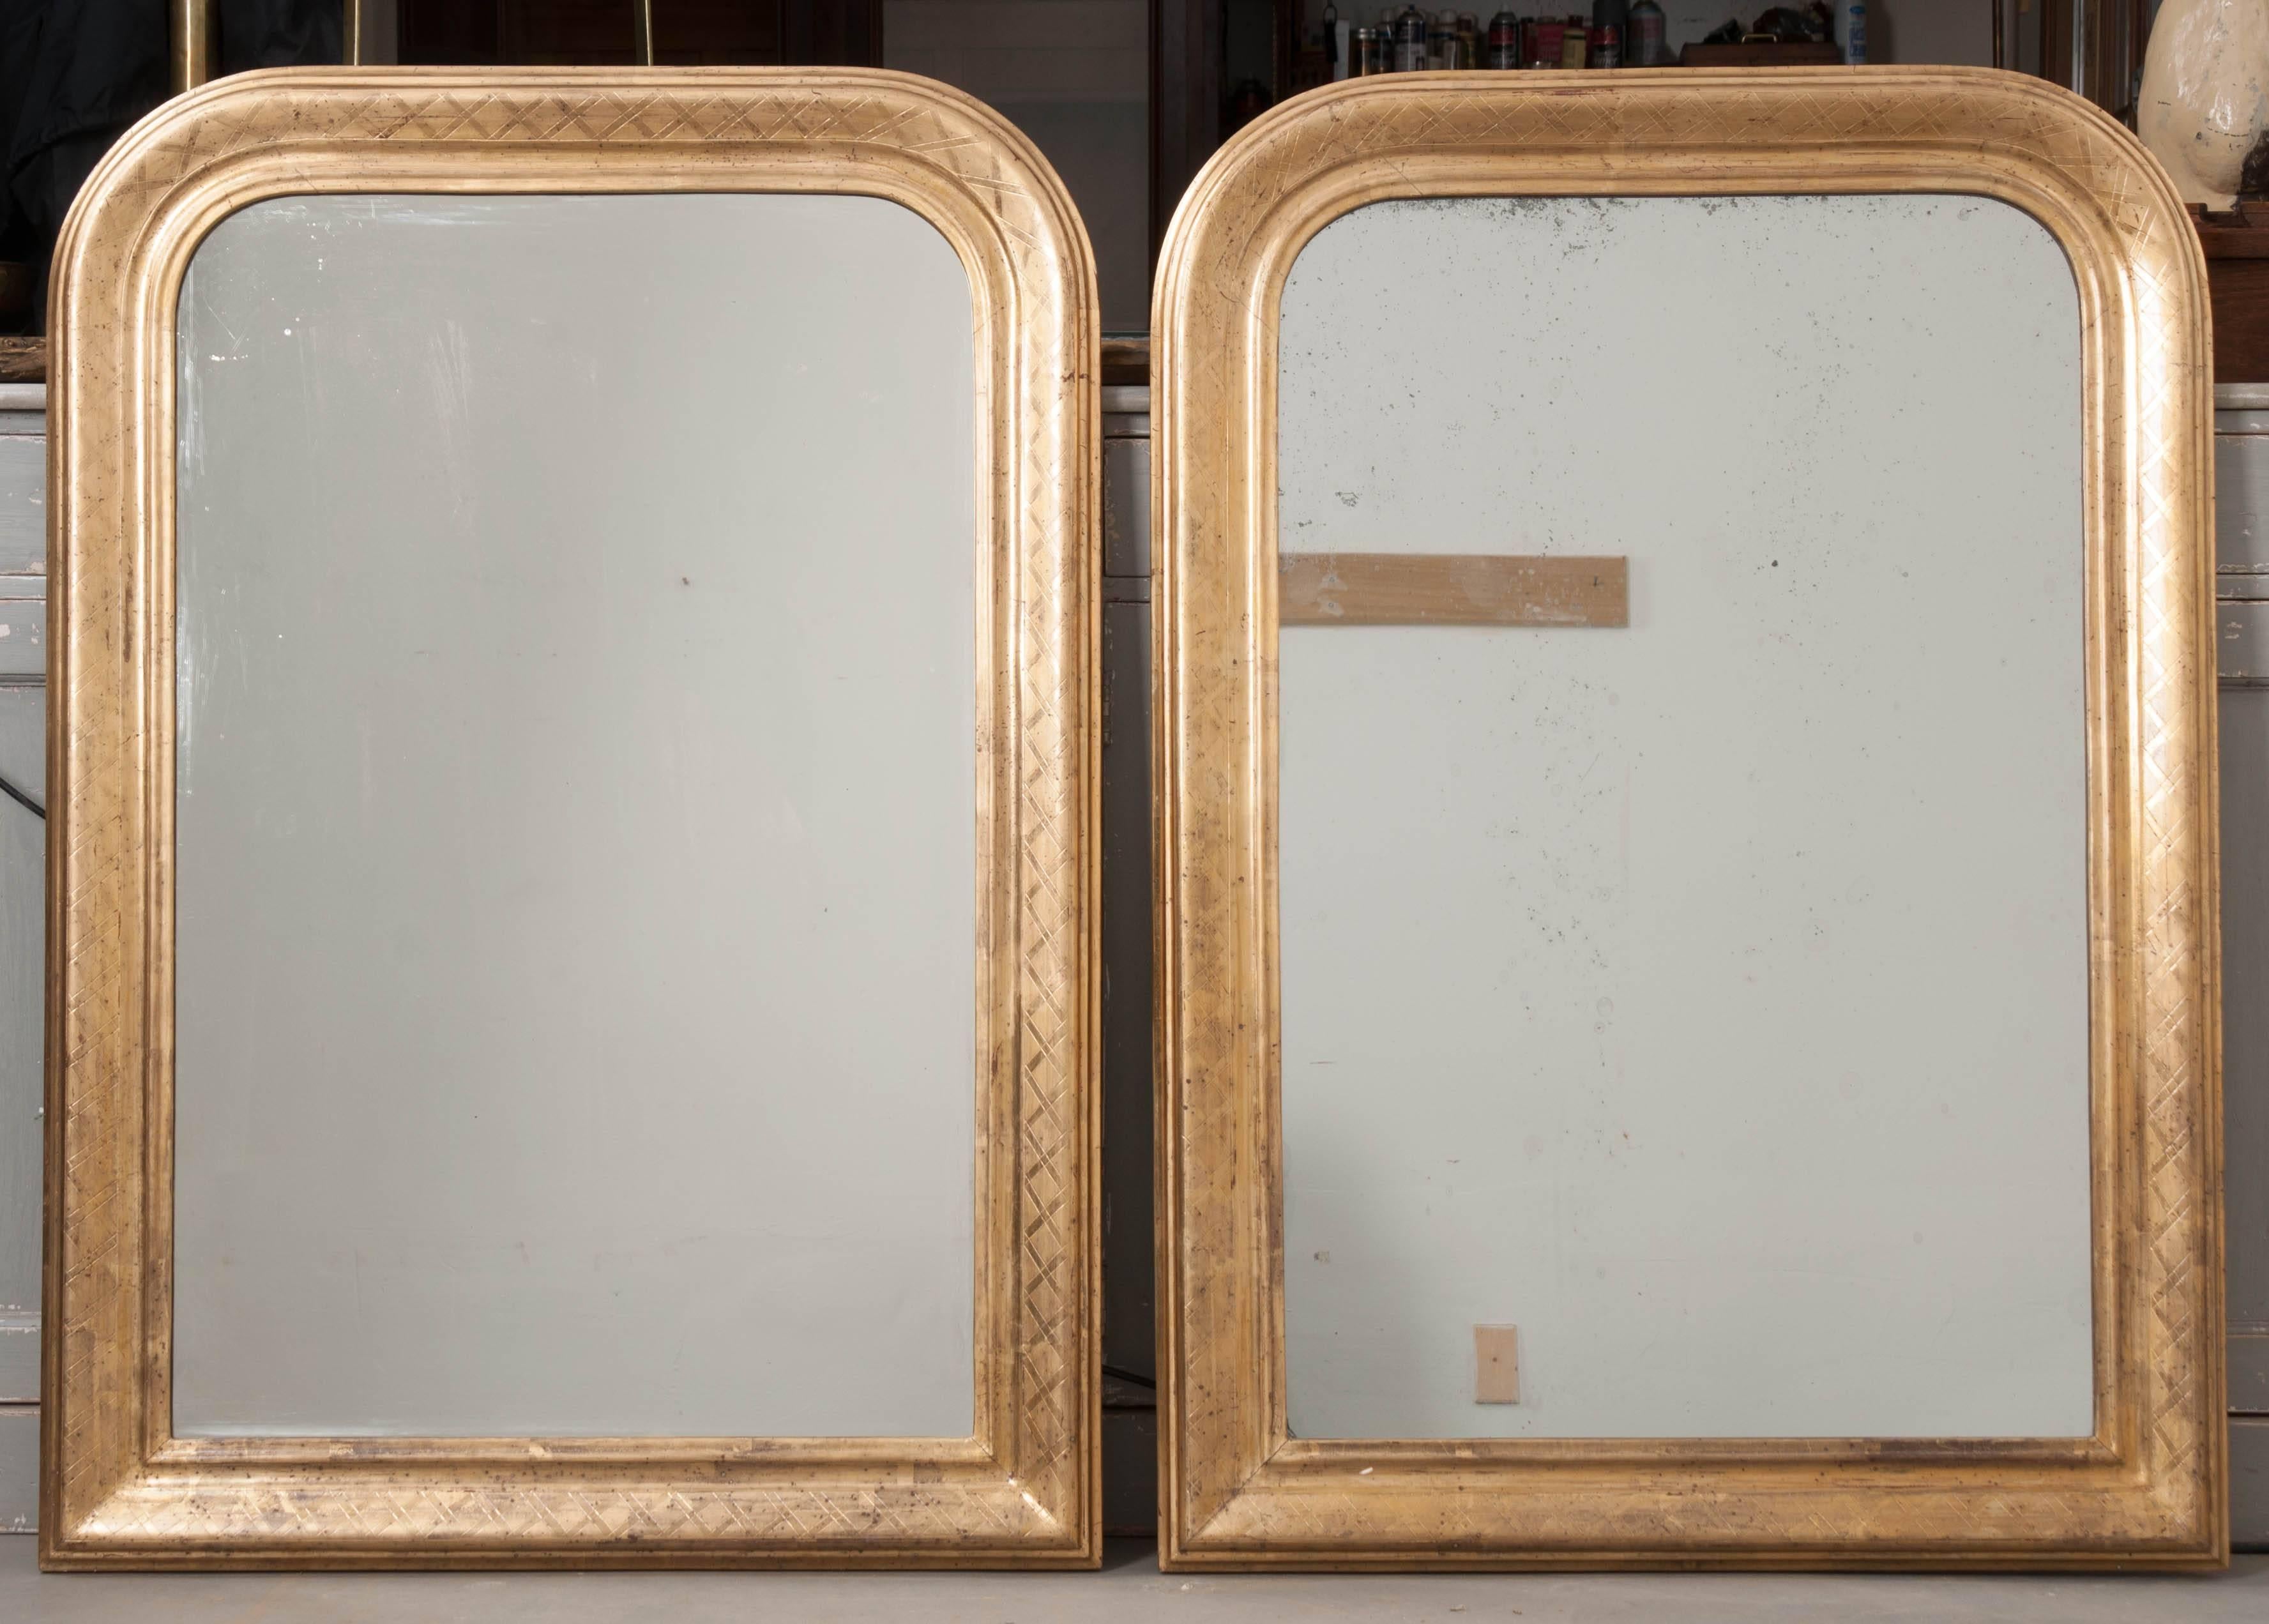 A fabulous pair of gold gilt Louis Philippe mirrors. These 19th century French antique pieces have remarkably intact gold gilt that is brilliant and lustrous. The pair both are finished with an etched cross-hatch design that provides some lovely